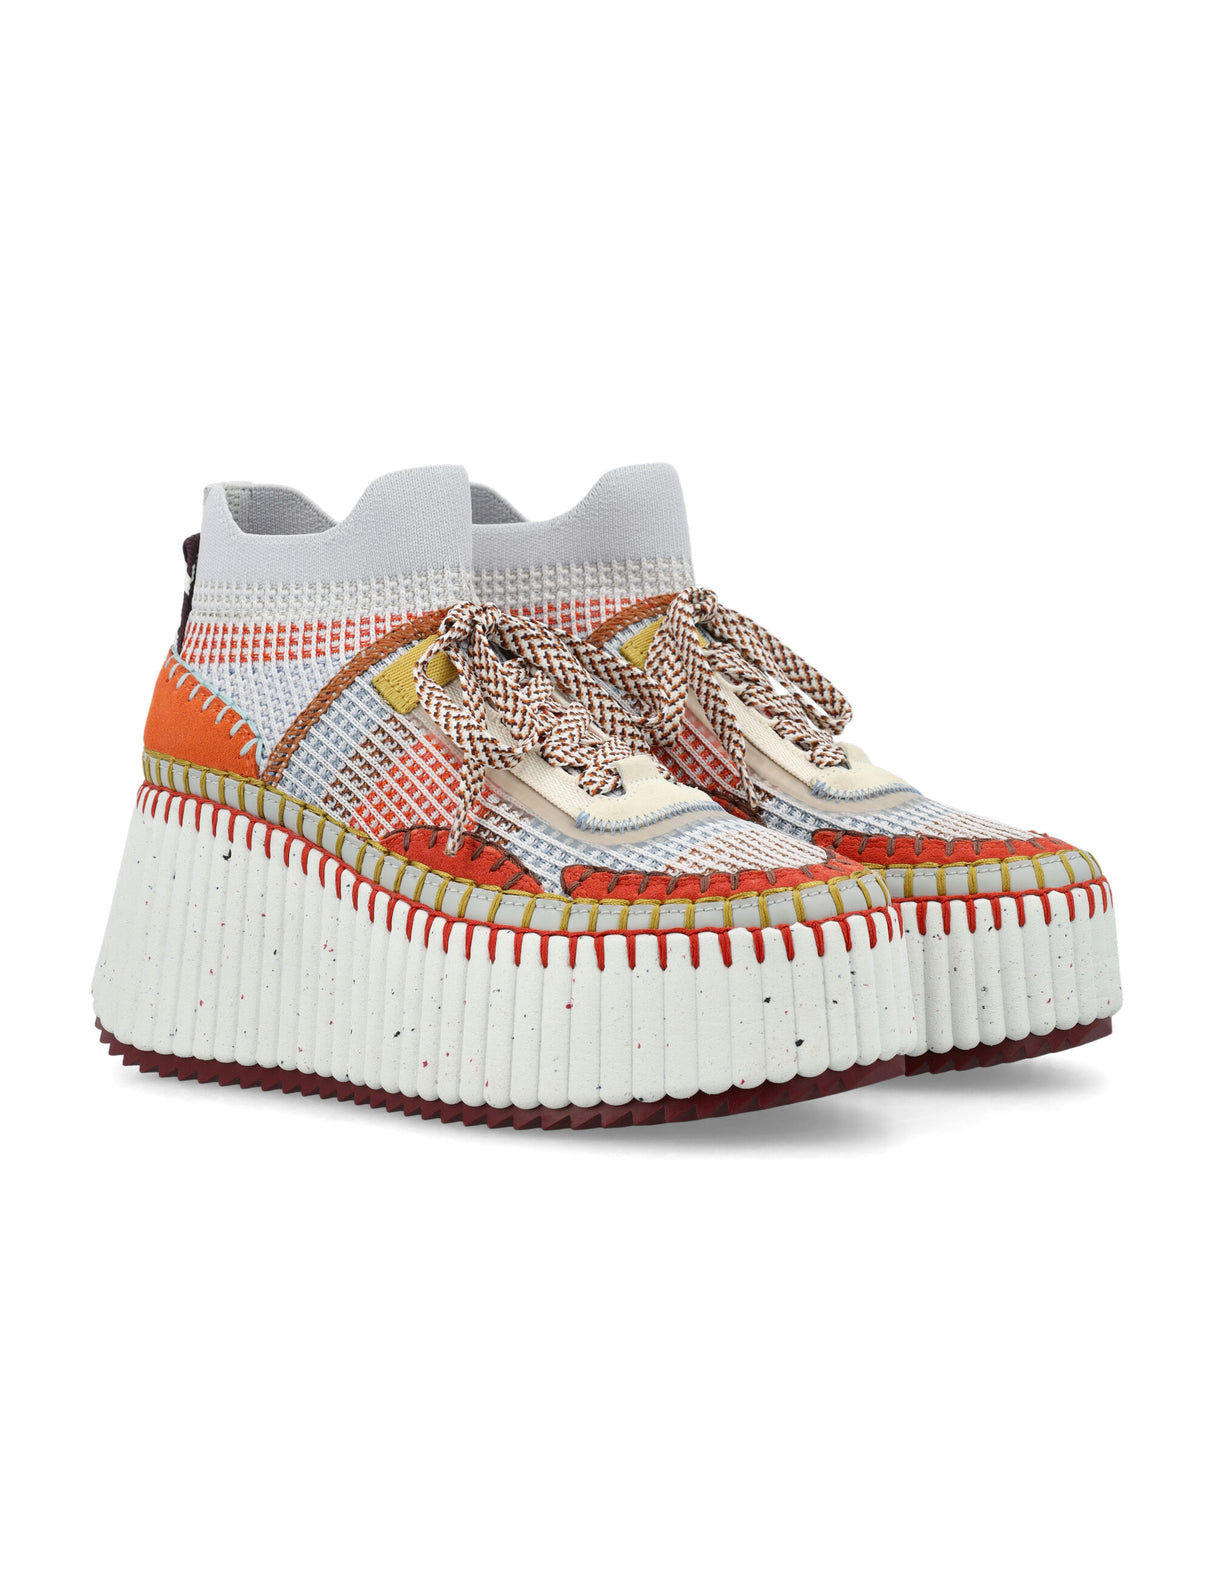 CHLOÉ Double Sole Sneakers for Women - Hand-Stitched Mesh Upper, Lace-Up Fastening, Orange